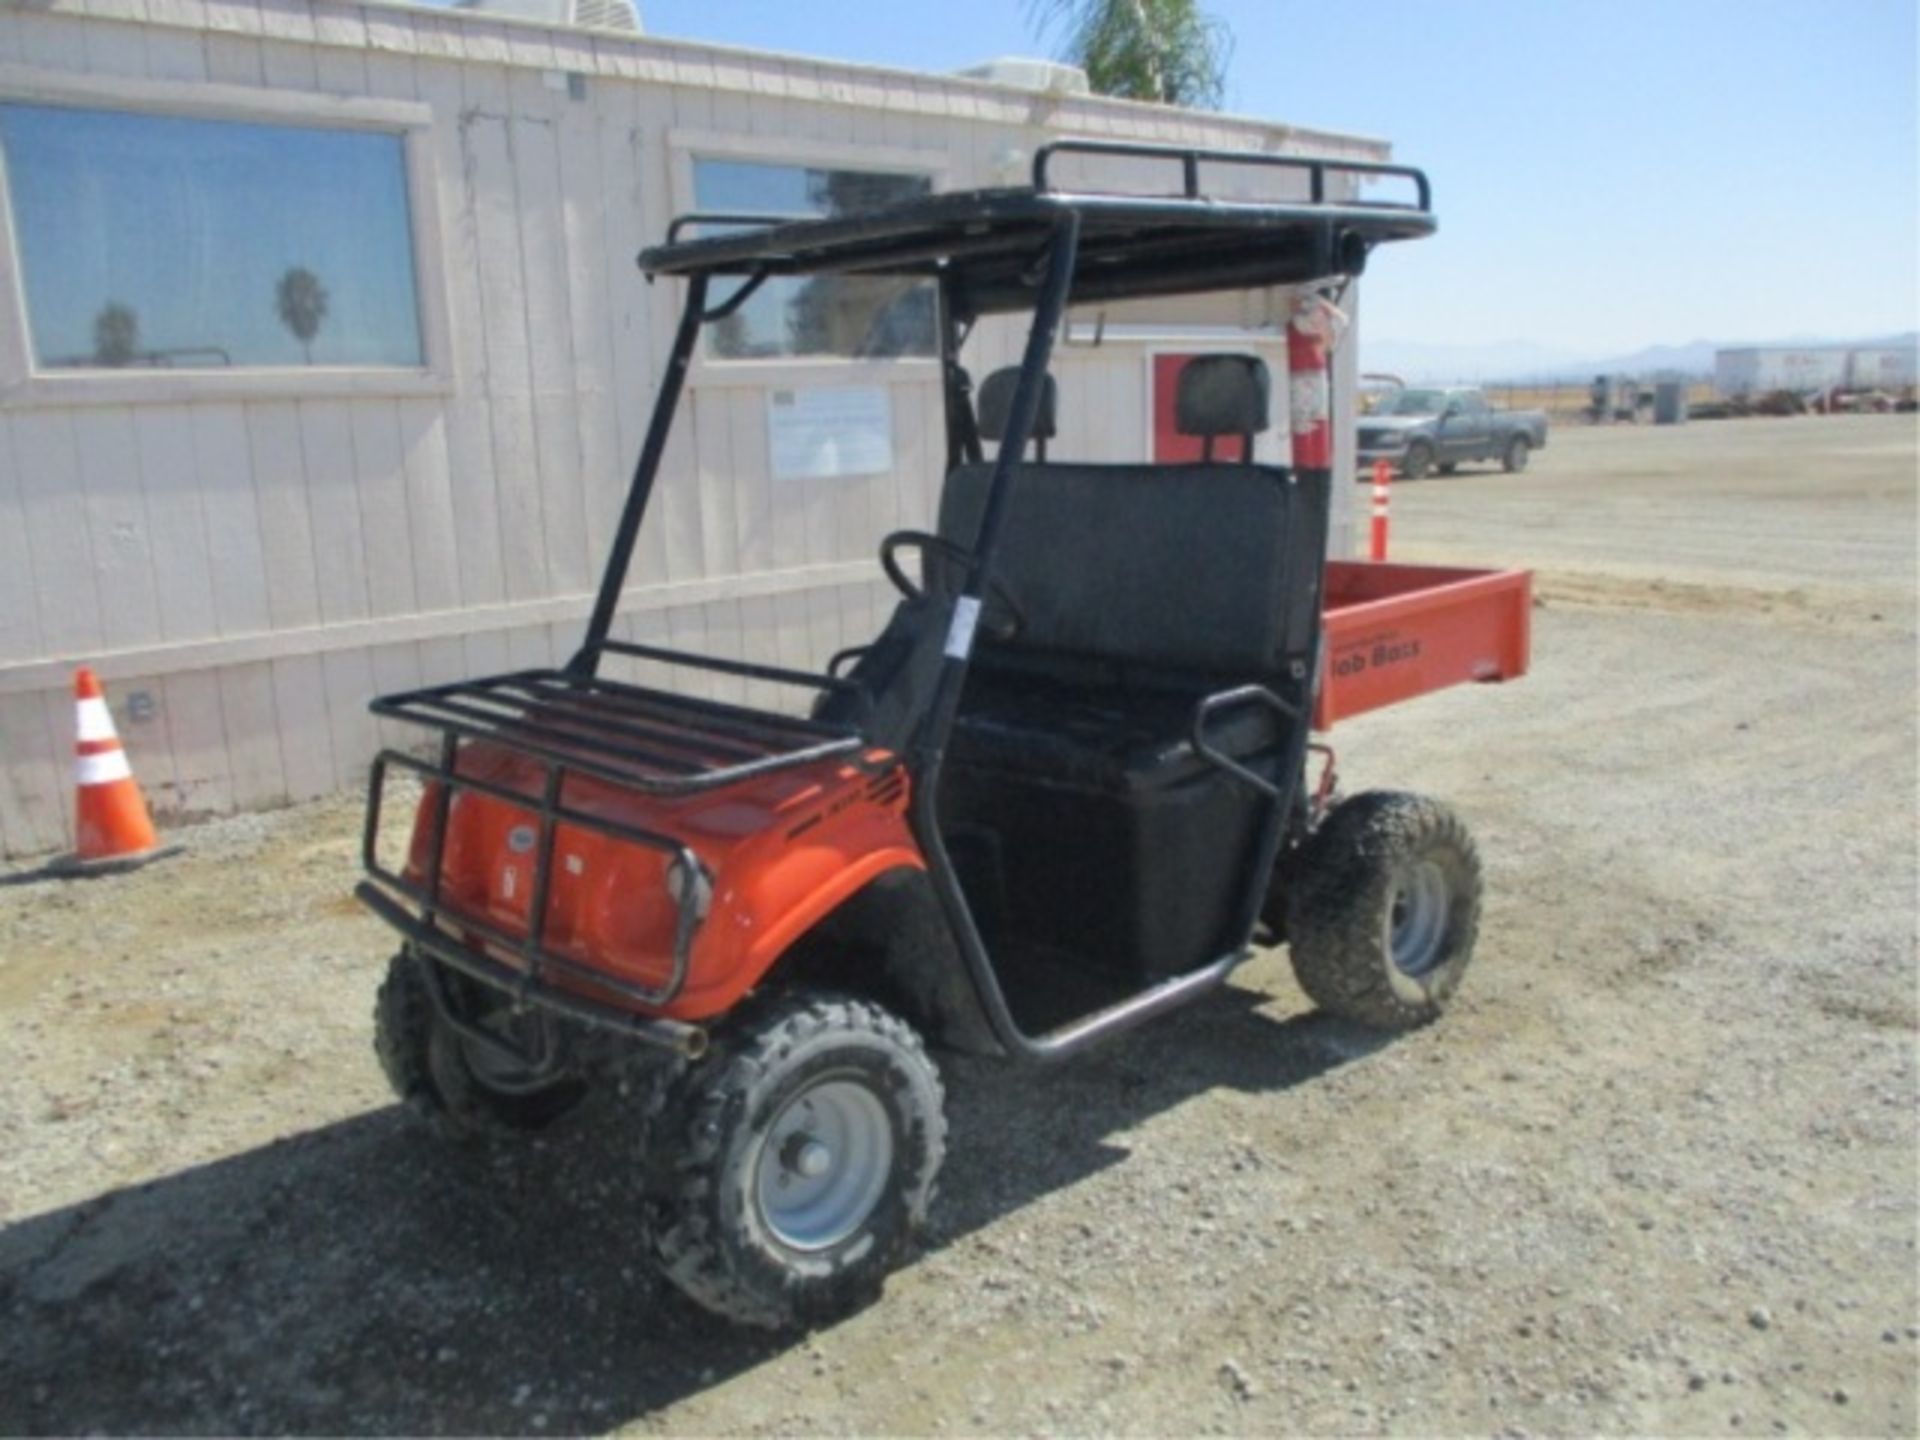 2008 American Sportworks Job Boss Utility Cart, Honda Gas, Rear Metal Dump Bed, Canopy, Tow Hitch, - Image 3 of 50